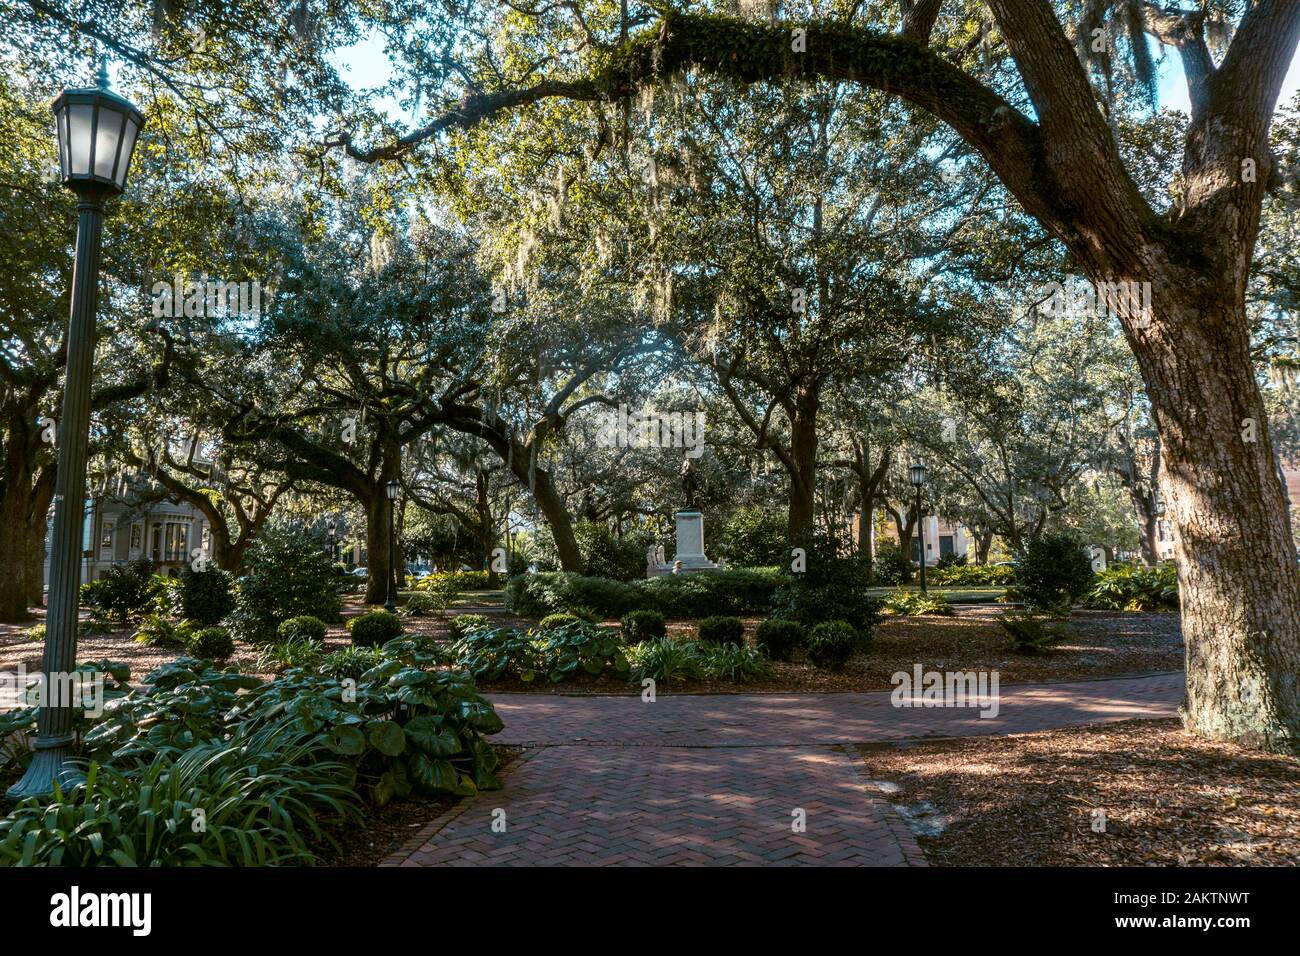 The live oaks is Savannah’s favorite tree, ornamenting streets, parks and cemeteries across the city. Stock Photo